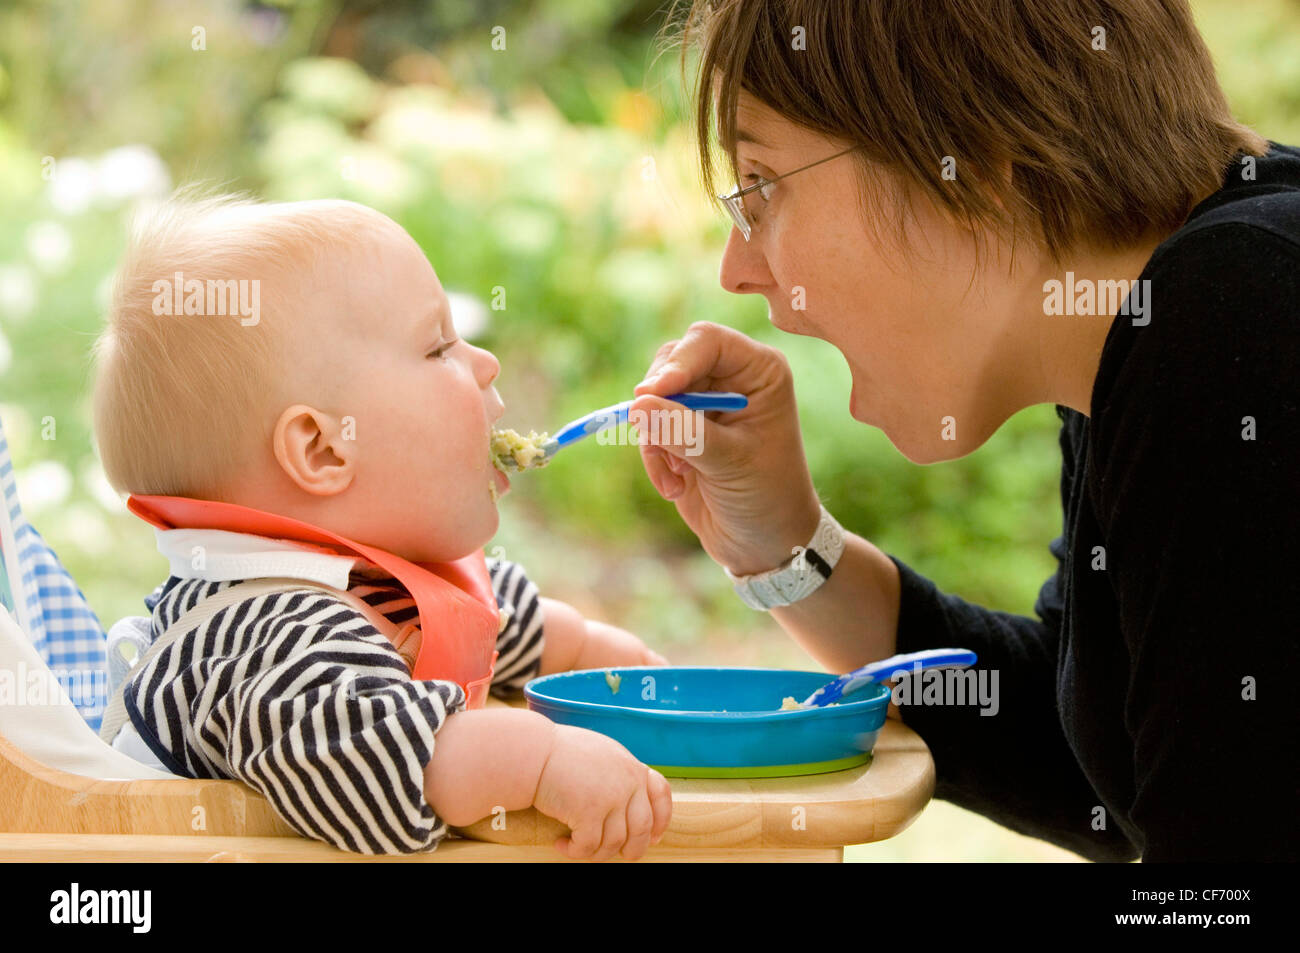 Blonde male child aged months wearing a black and white stripey top and an orange bib, sitting in a high chair and being fed Stock Photo